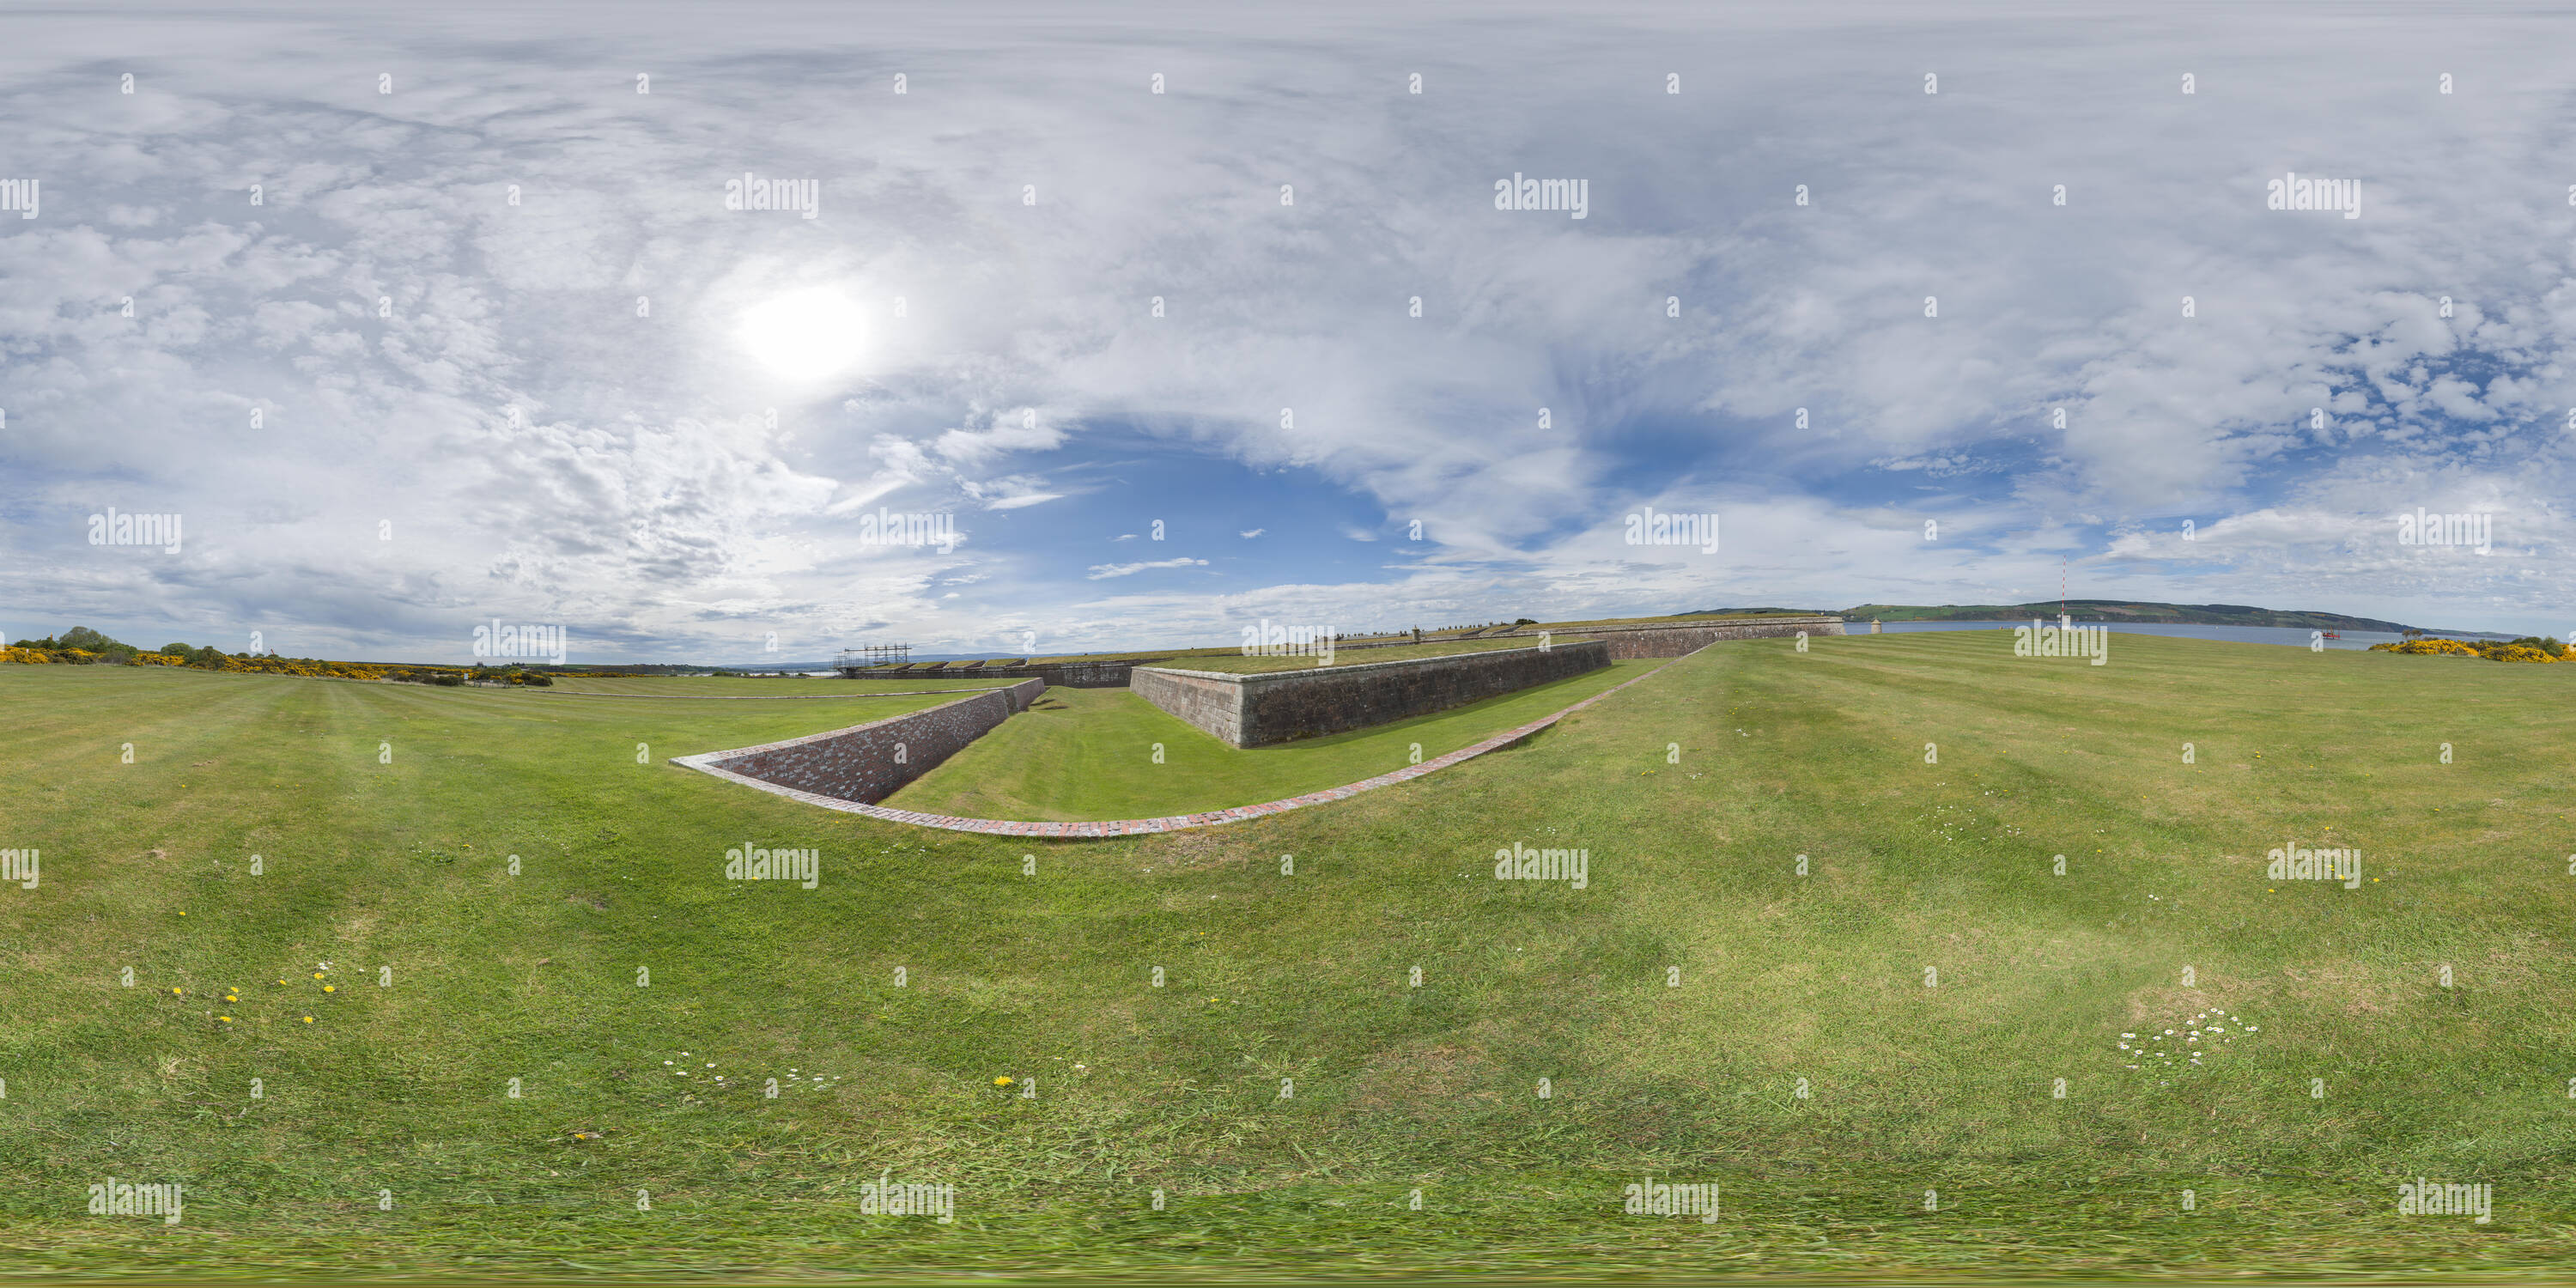 360 degree panoramic view of The hanoverian fort built by king George II in the mid 18th century at Fort George peninsula on the Moray Firth, opposite the lighthouse at Chanonry P